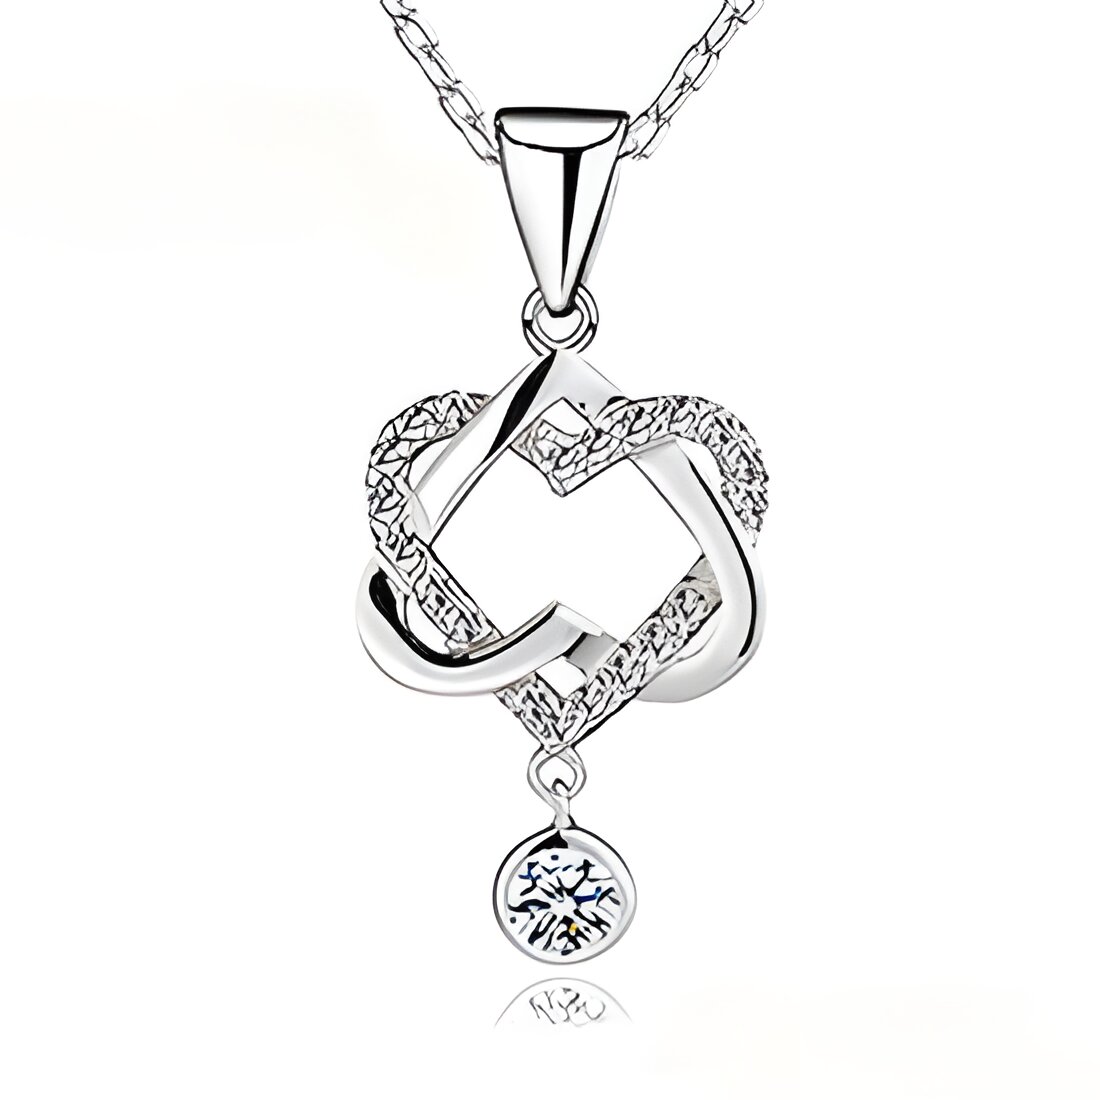 Free Interwoven Heart Shaped Necklace With Gem